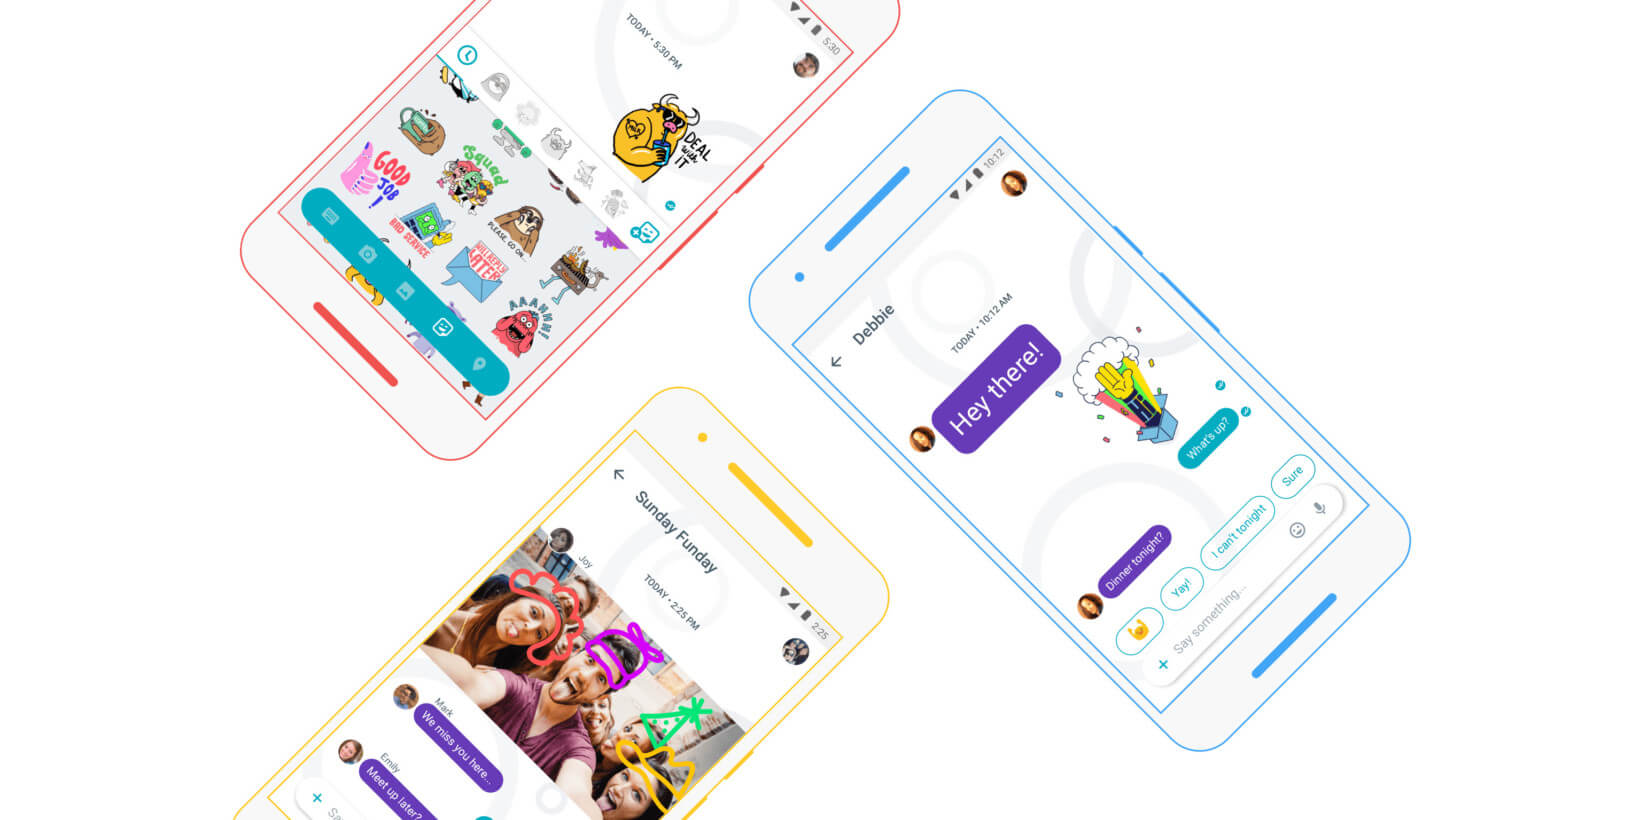 Google Allo gets the option to edit images within conversations